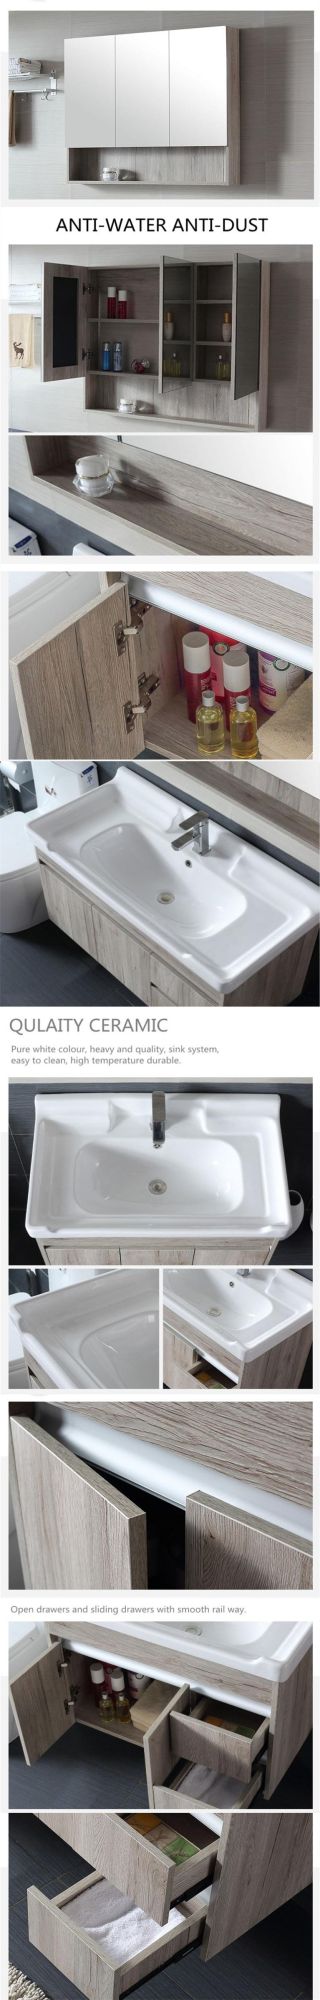 Simple Brand New Design Stylish Hot Sell Glass Basin Bathroom Cabinet with Mirror